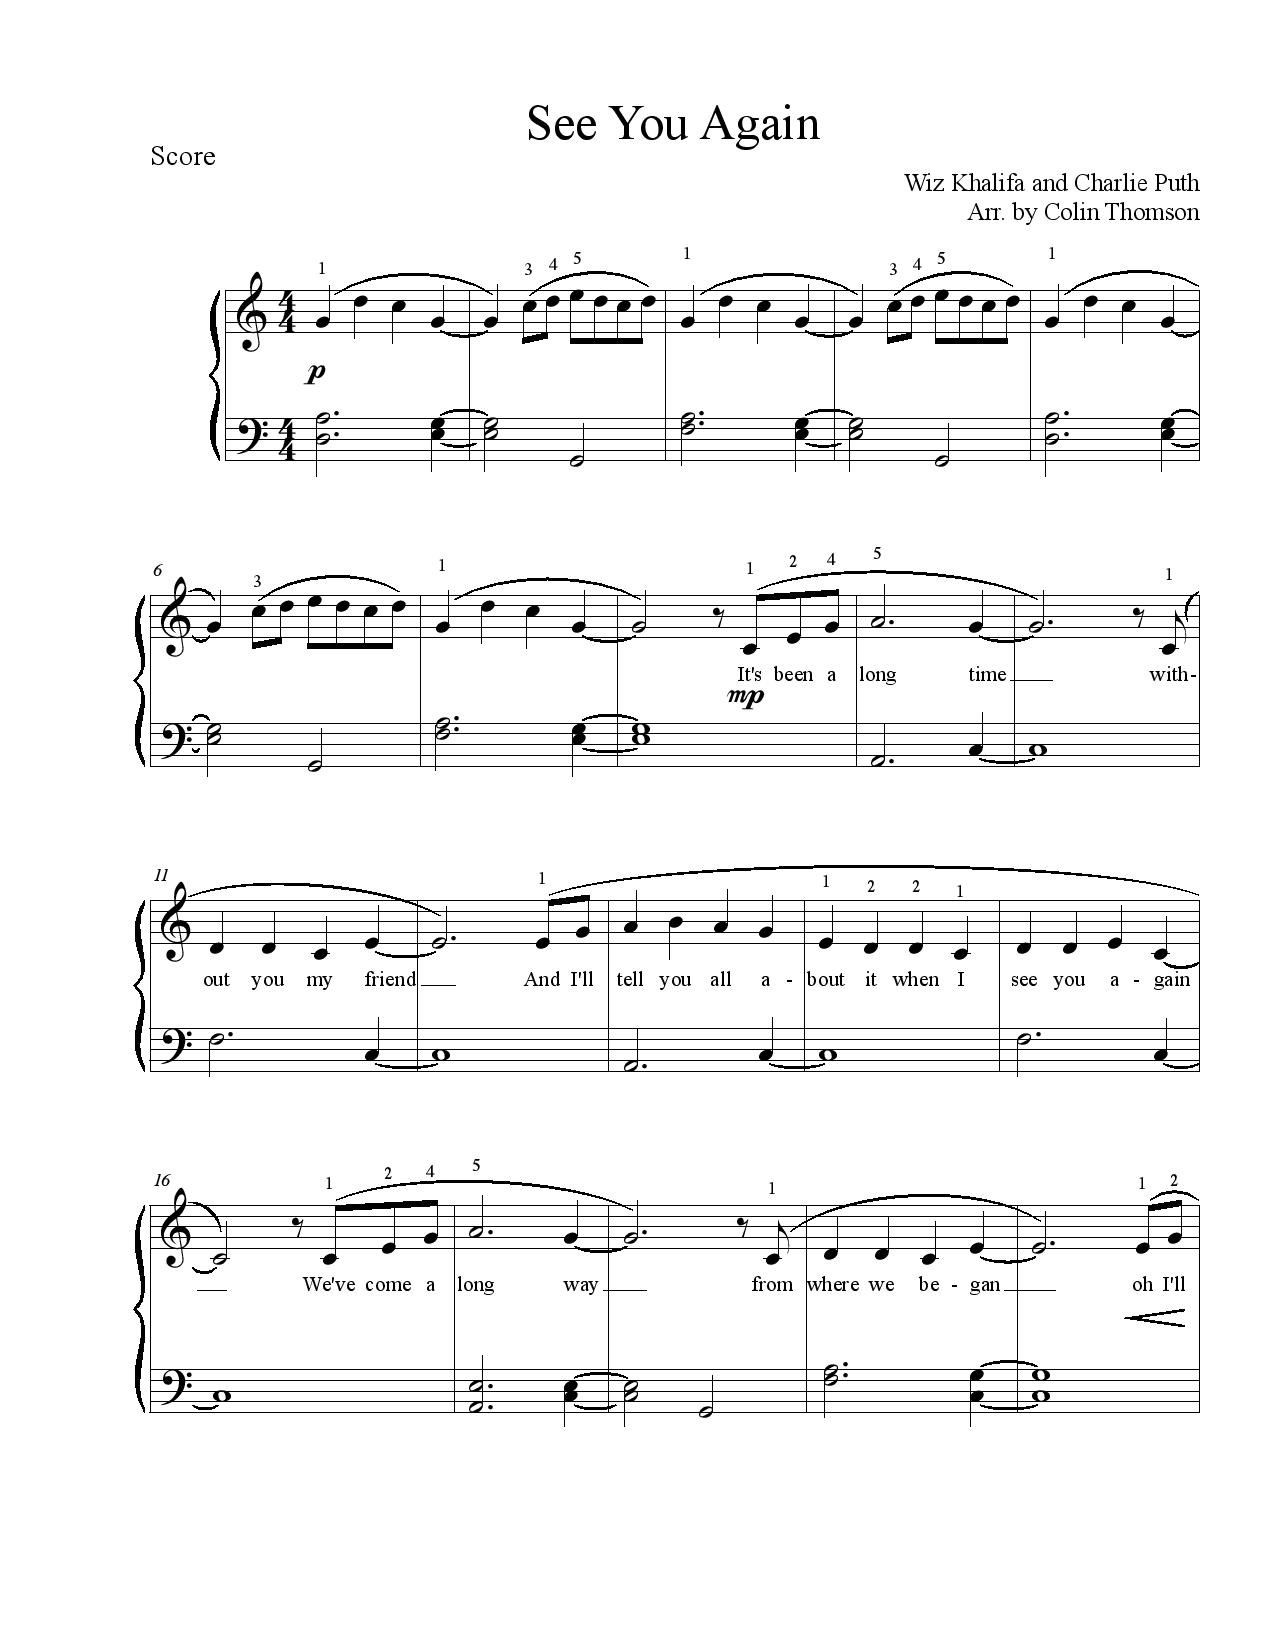 See you again piano notes pdf